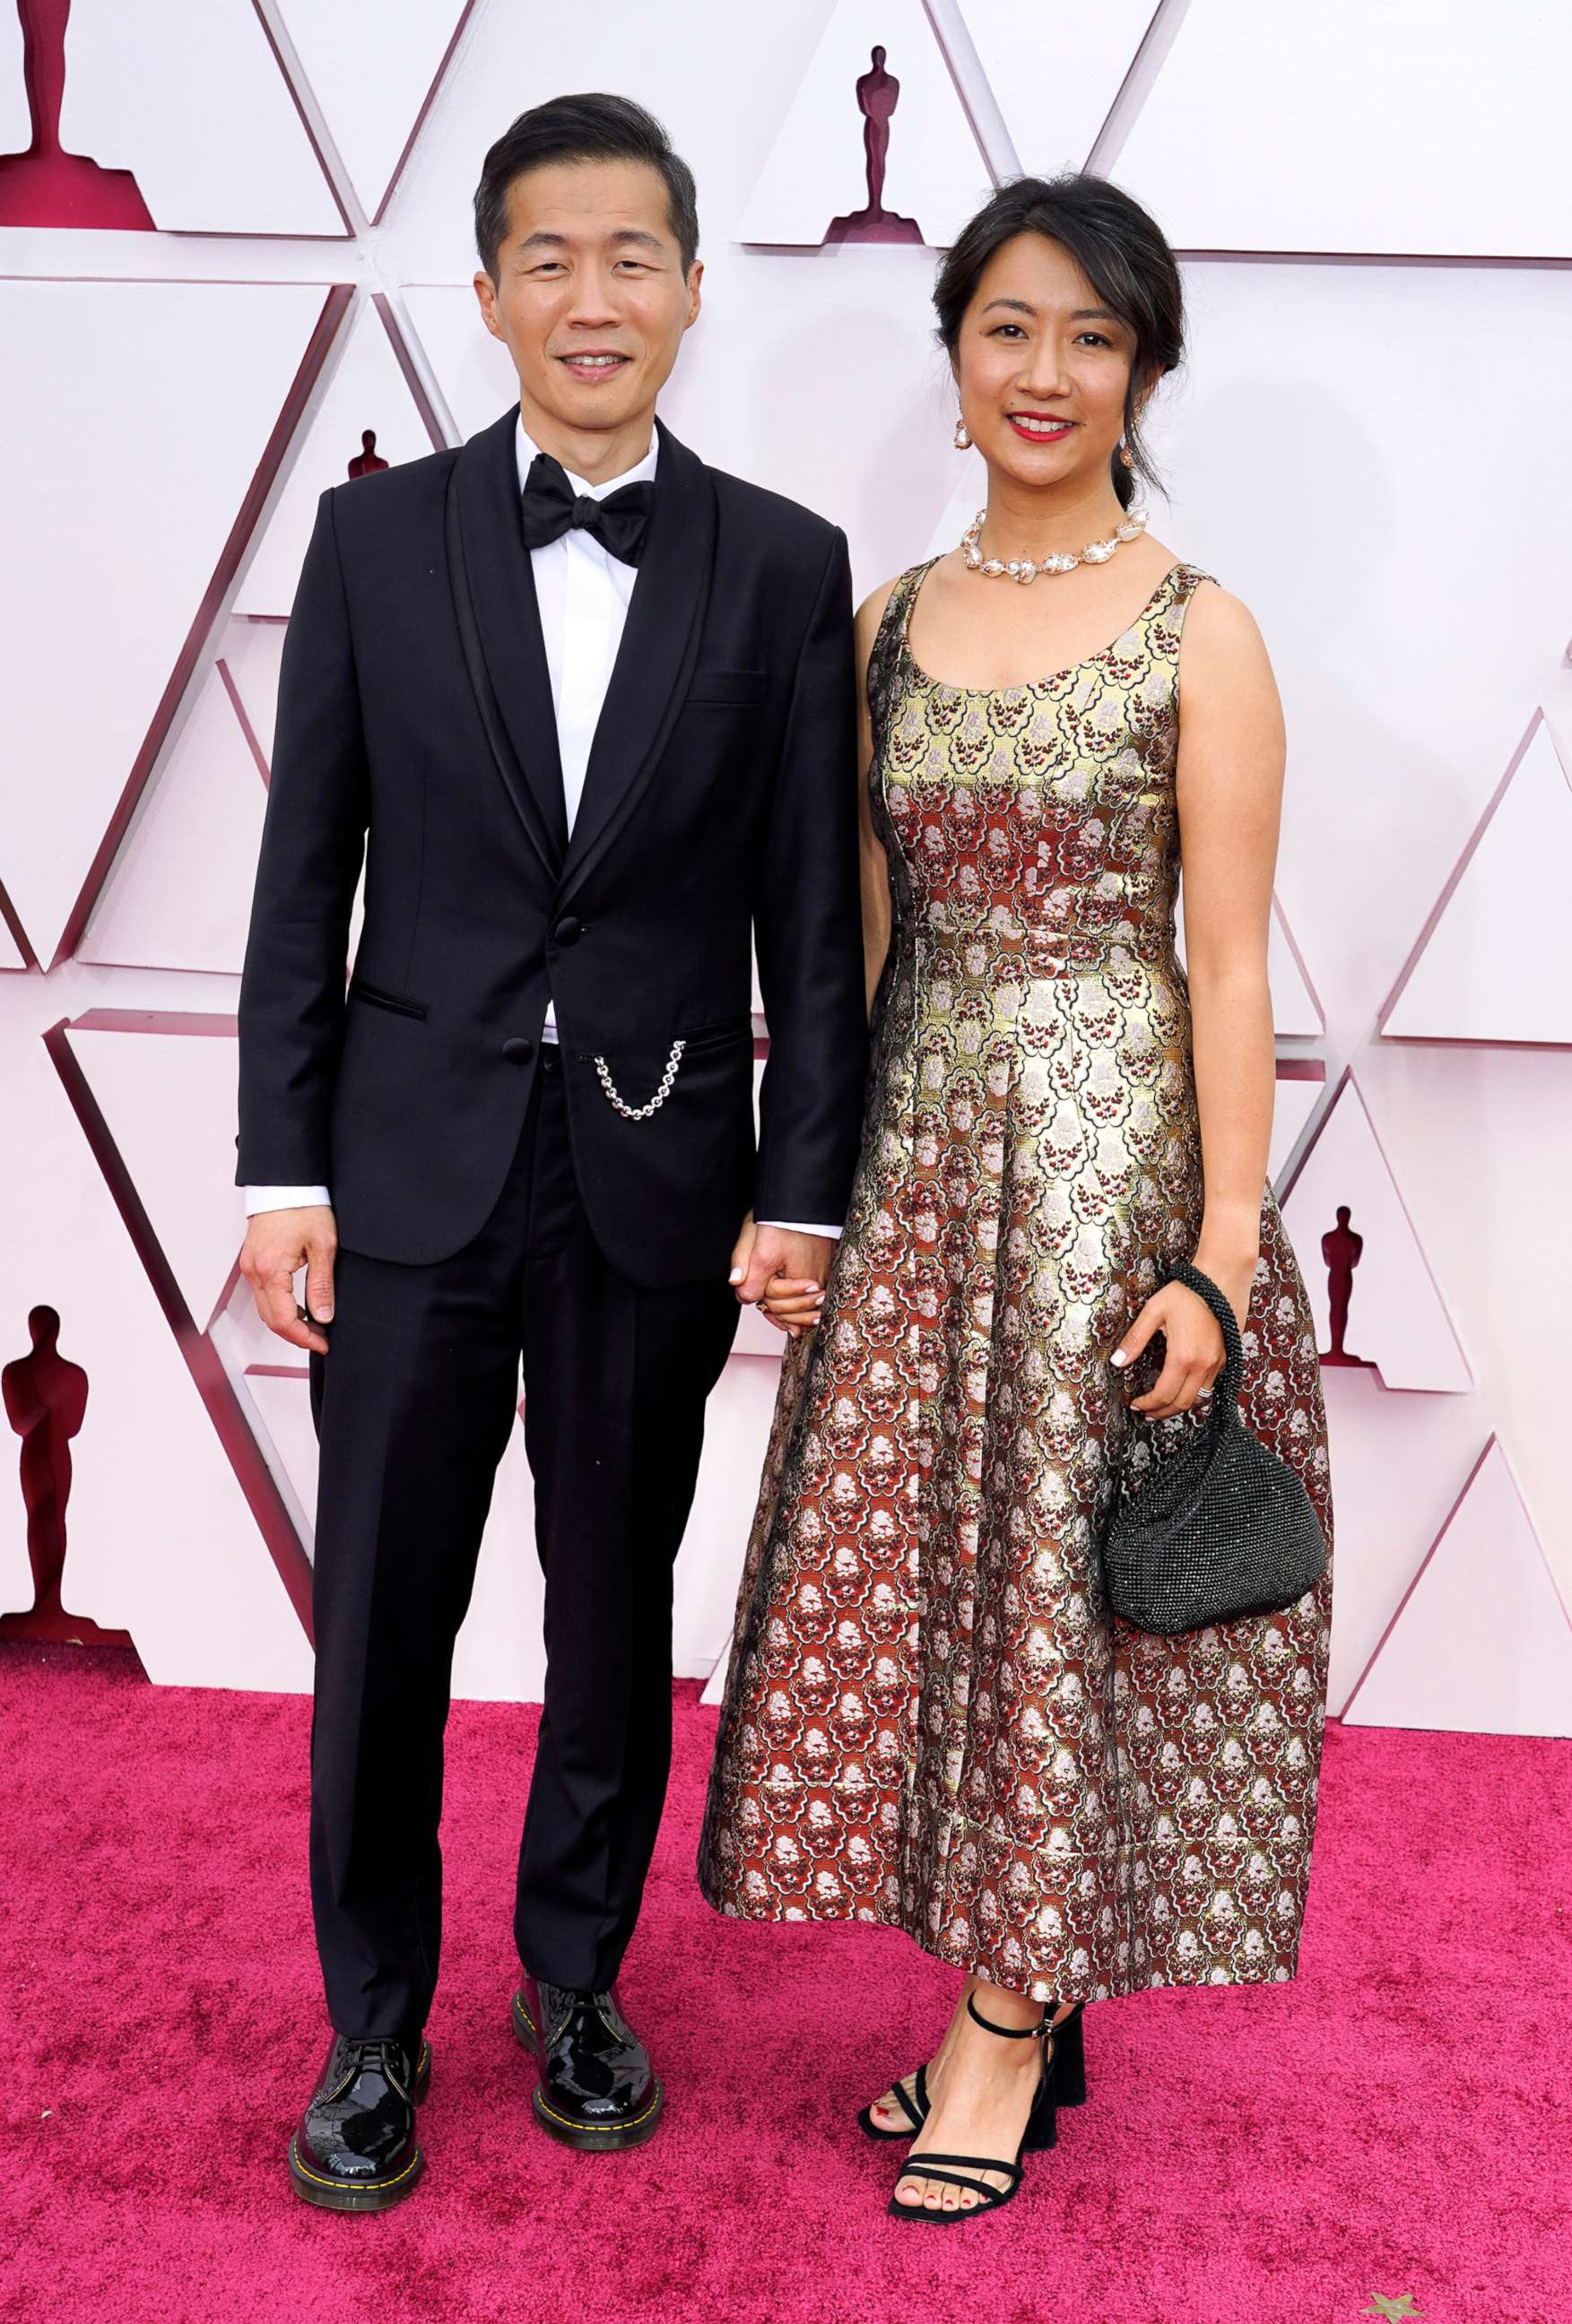 PHOTO: Lee Isaac Chung and Valerie Chung attend the 93rd Annual Academy Awards, April 25, 2021, in Los Angeles.